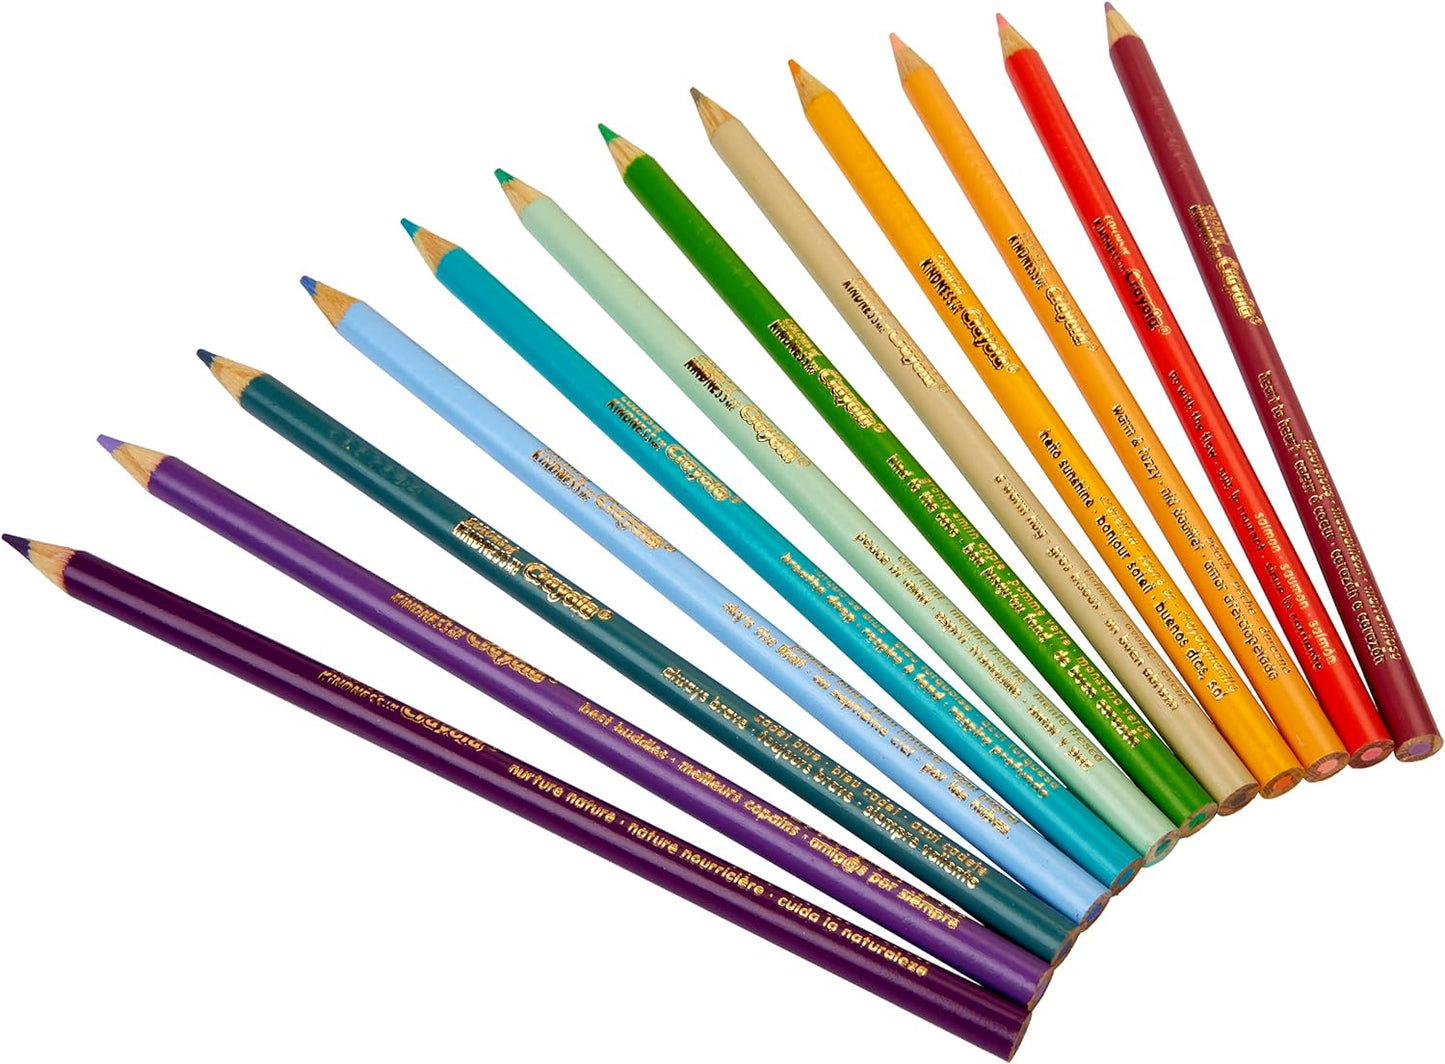 Crayola Colors of Kindness Colored Pencils - Pack of 12